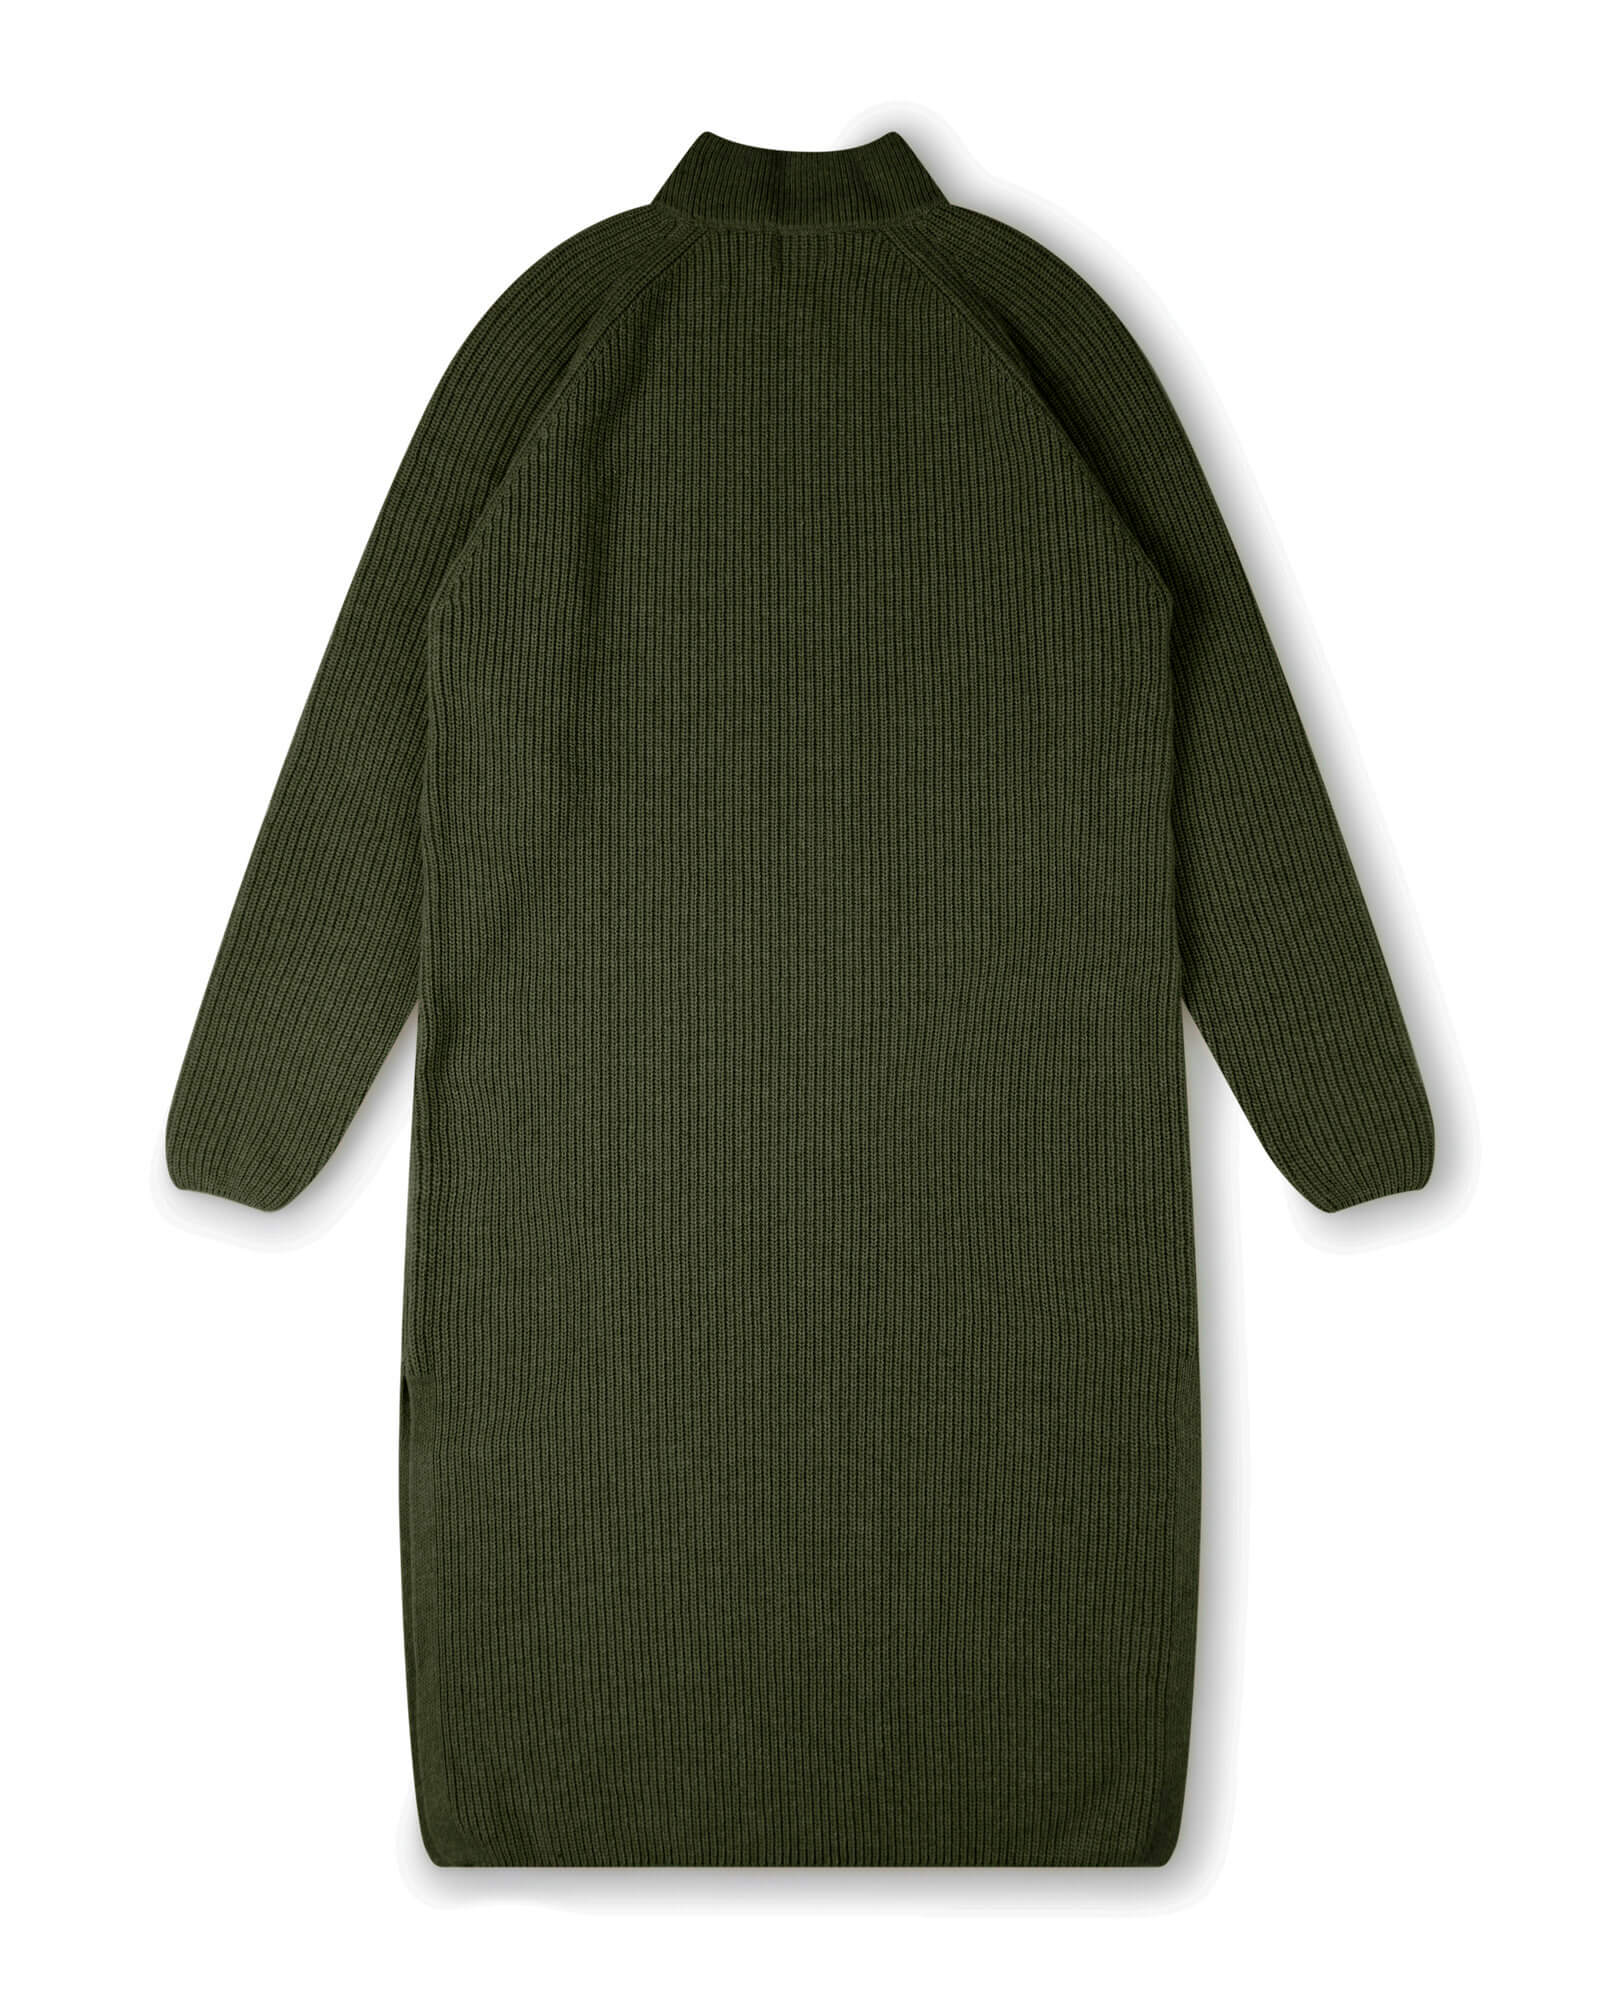 Dark green knitted loden dress made from recycled wool by Matona